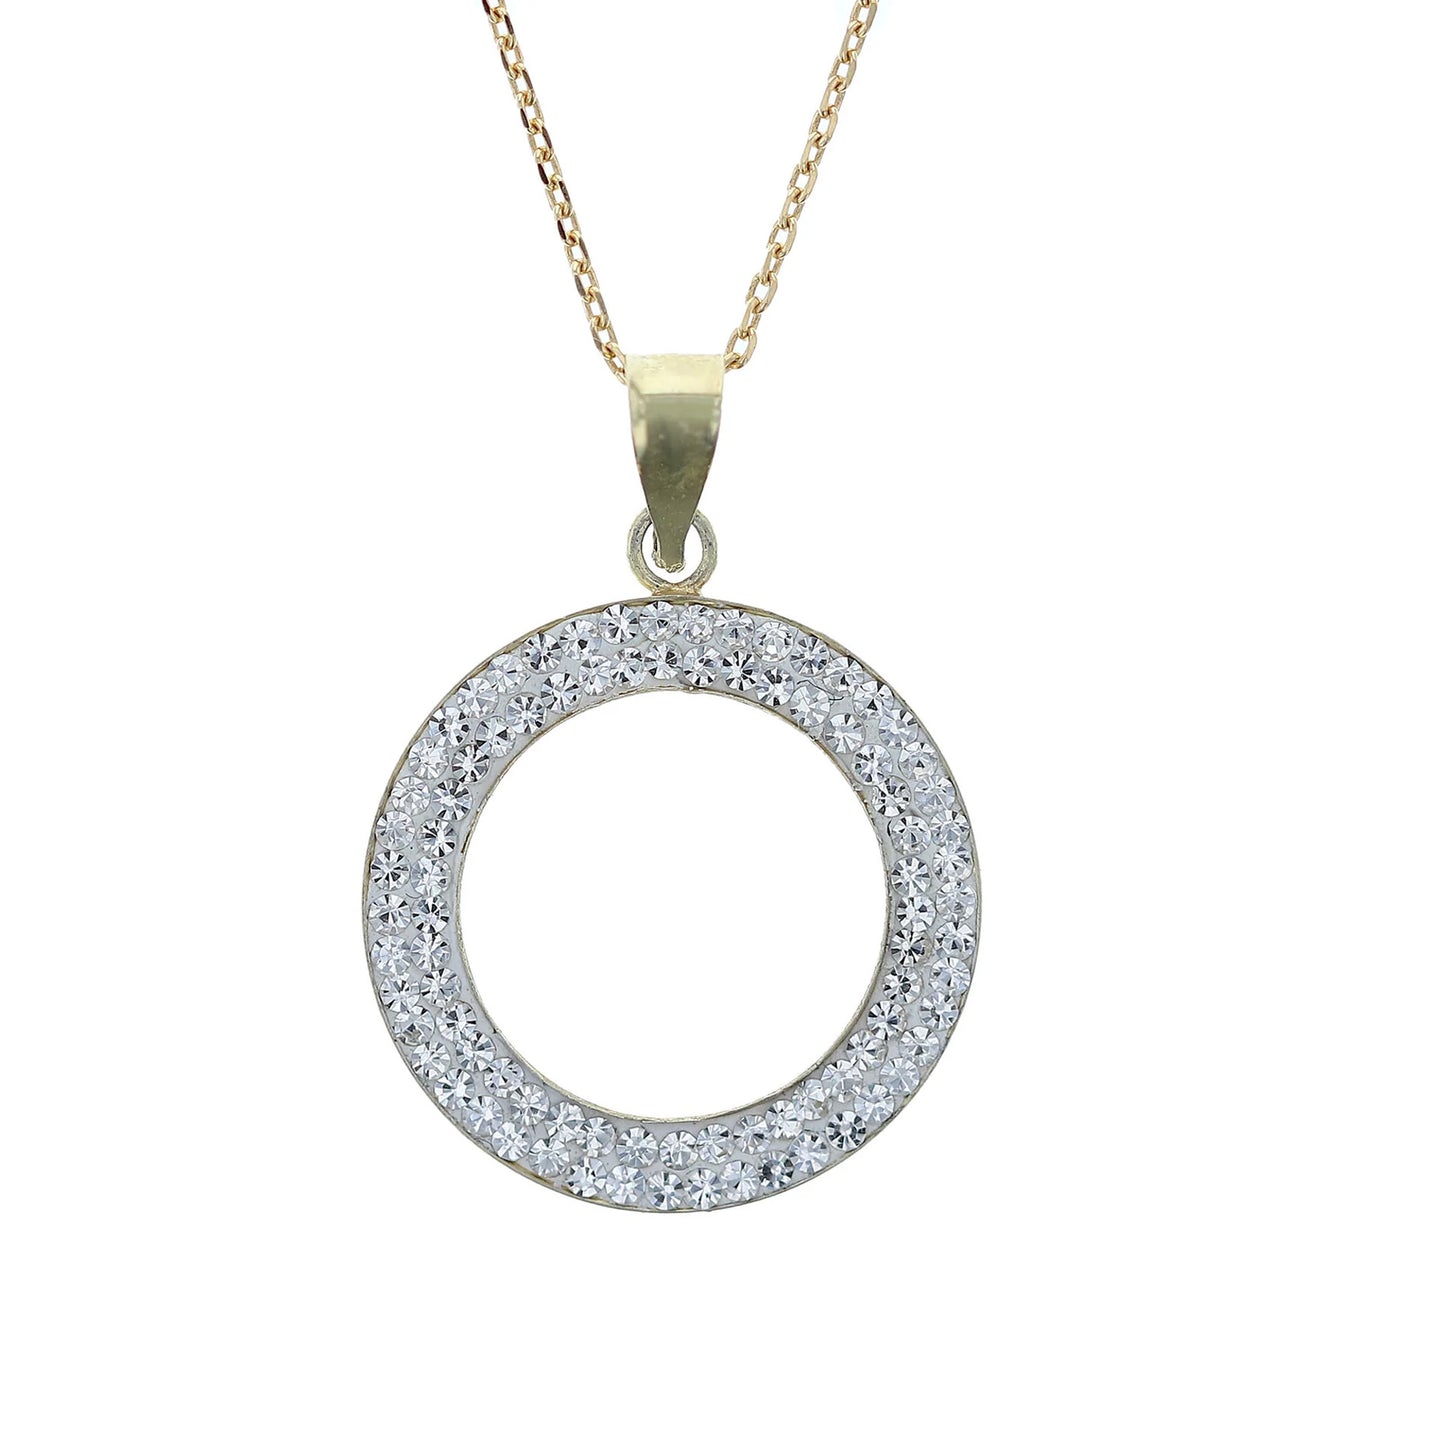 18K Gold Plated Sterling Silver Open Circle Medallion Necklace with White Crystal